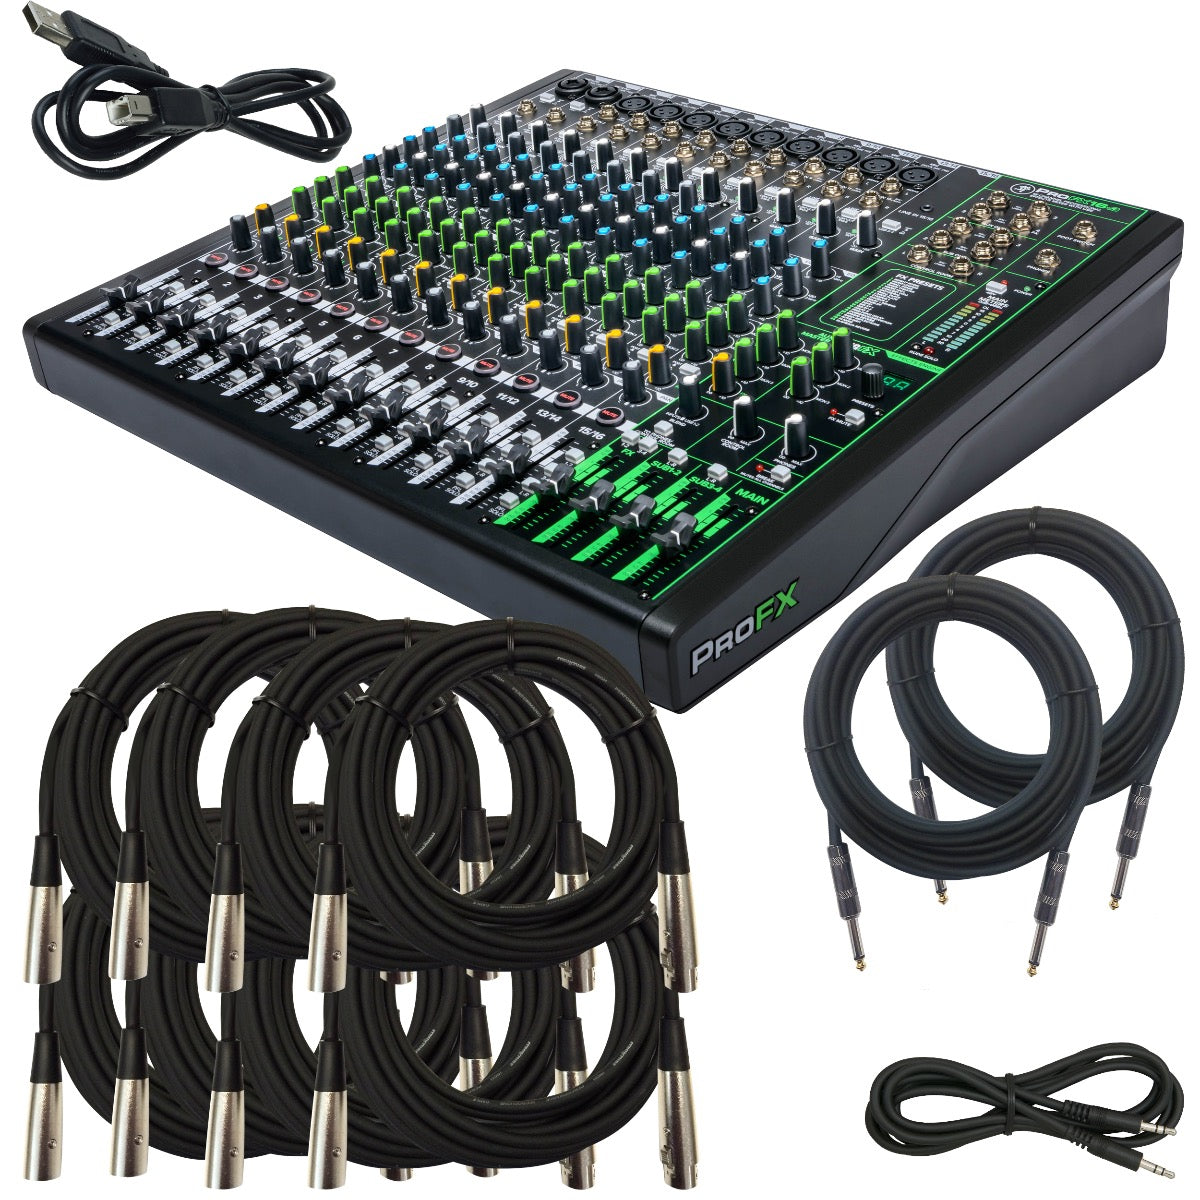 KIT　Effects　Mackie　CABLE　with　ProFX16v3　–　Mixer　USB　Kraft　Music